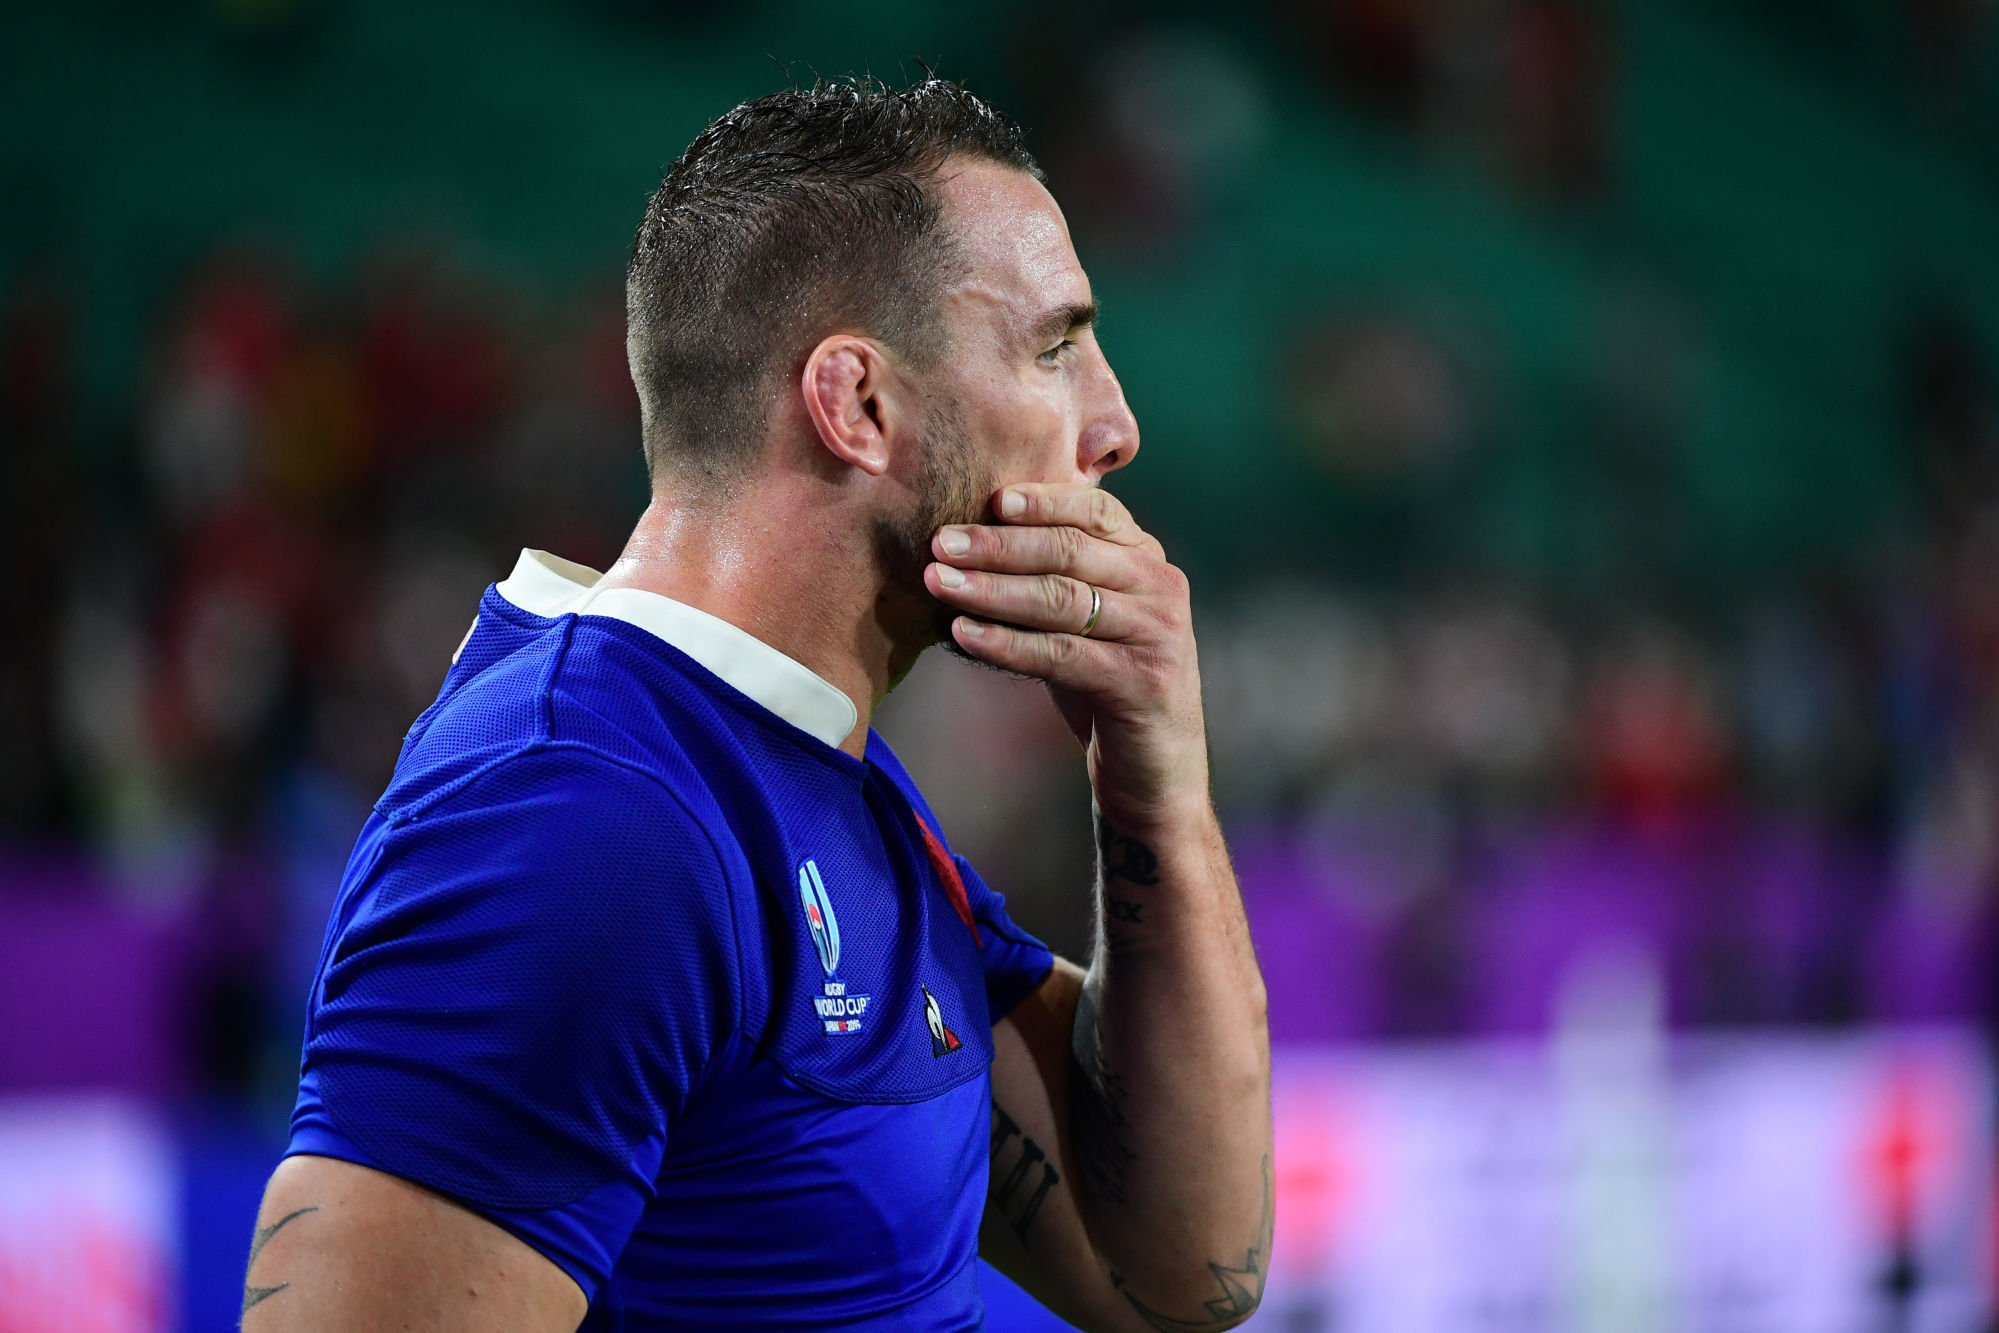 Disappointment for Louis PICAMOLES of France after his side loses the Rugby World Cup 2019 Quarter Final match between Wales and France on October 20, 2019 in Oita, Japan. (Photo by Dave Winter/Icon Sport) - Louis PICAMOLES - Oita Stadium - Oita (Japon)